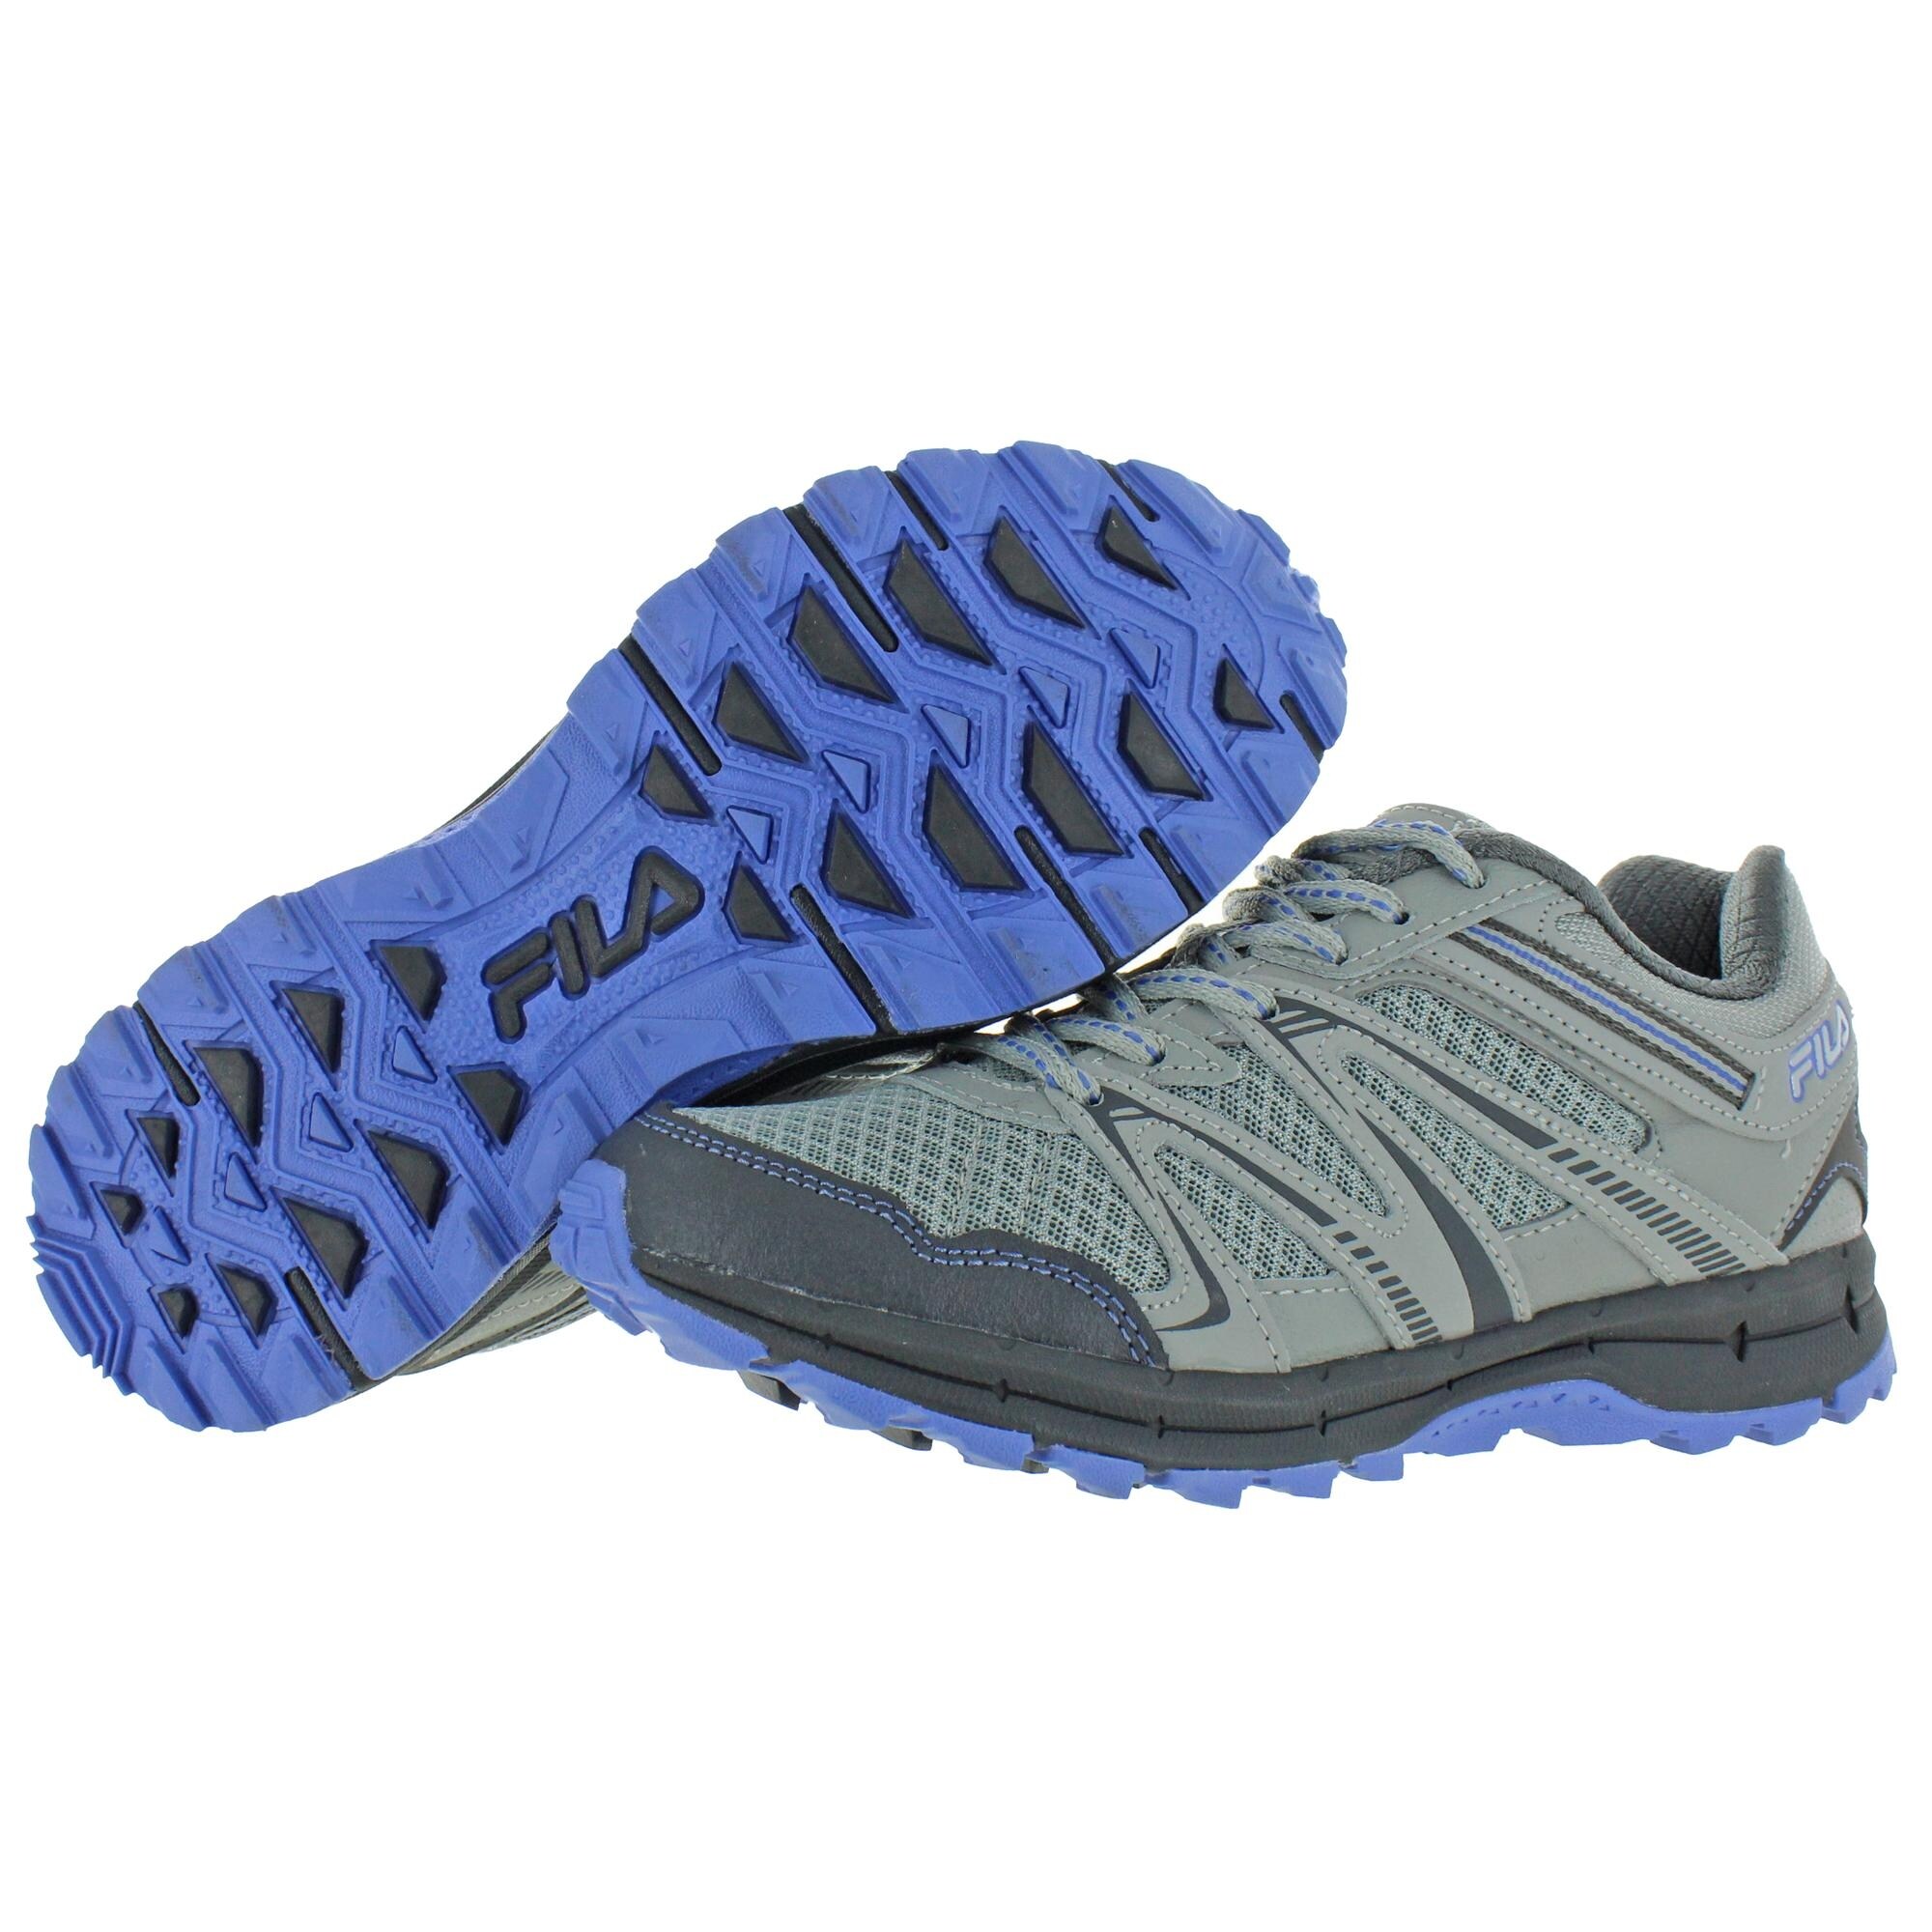 mesh athletic shoes